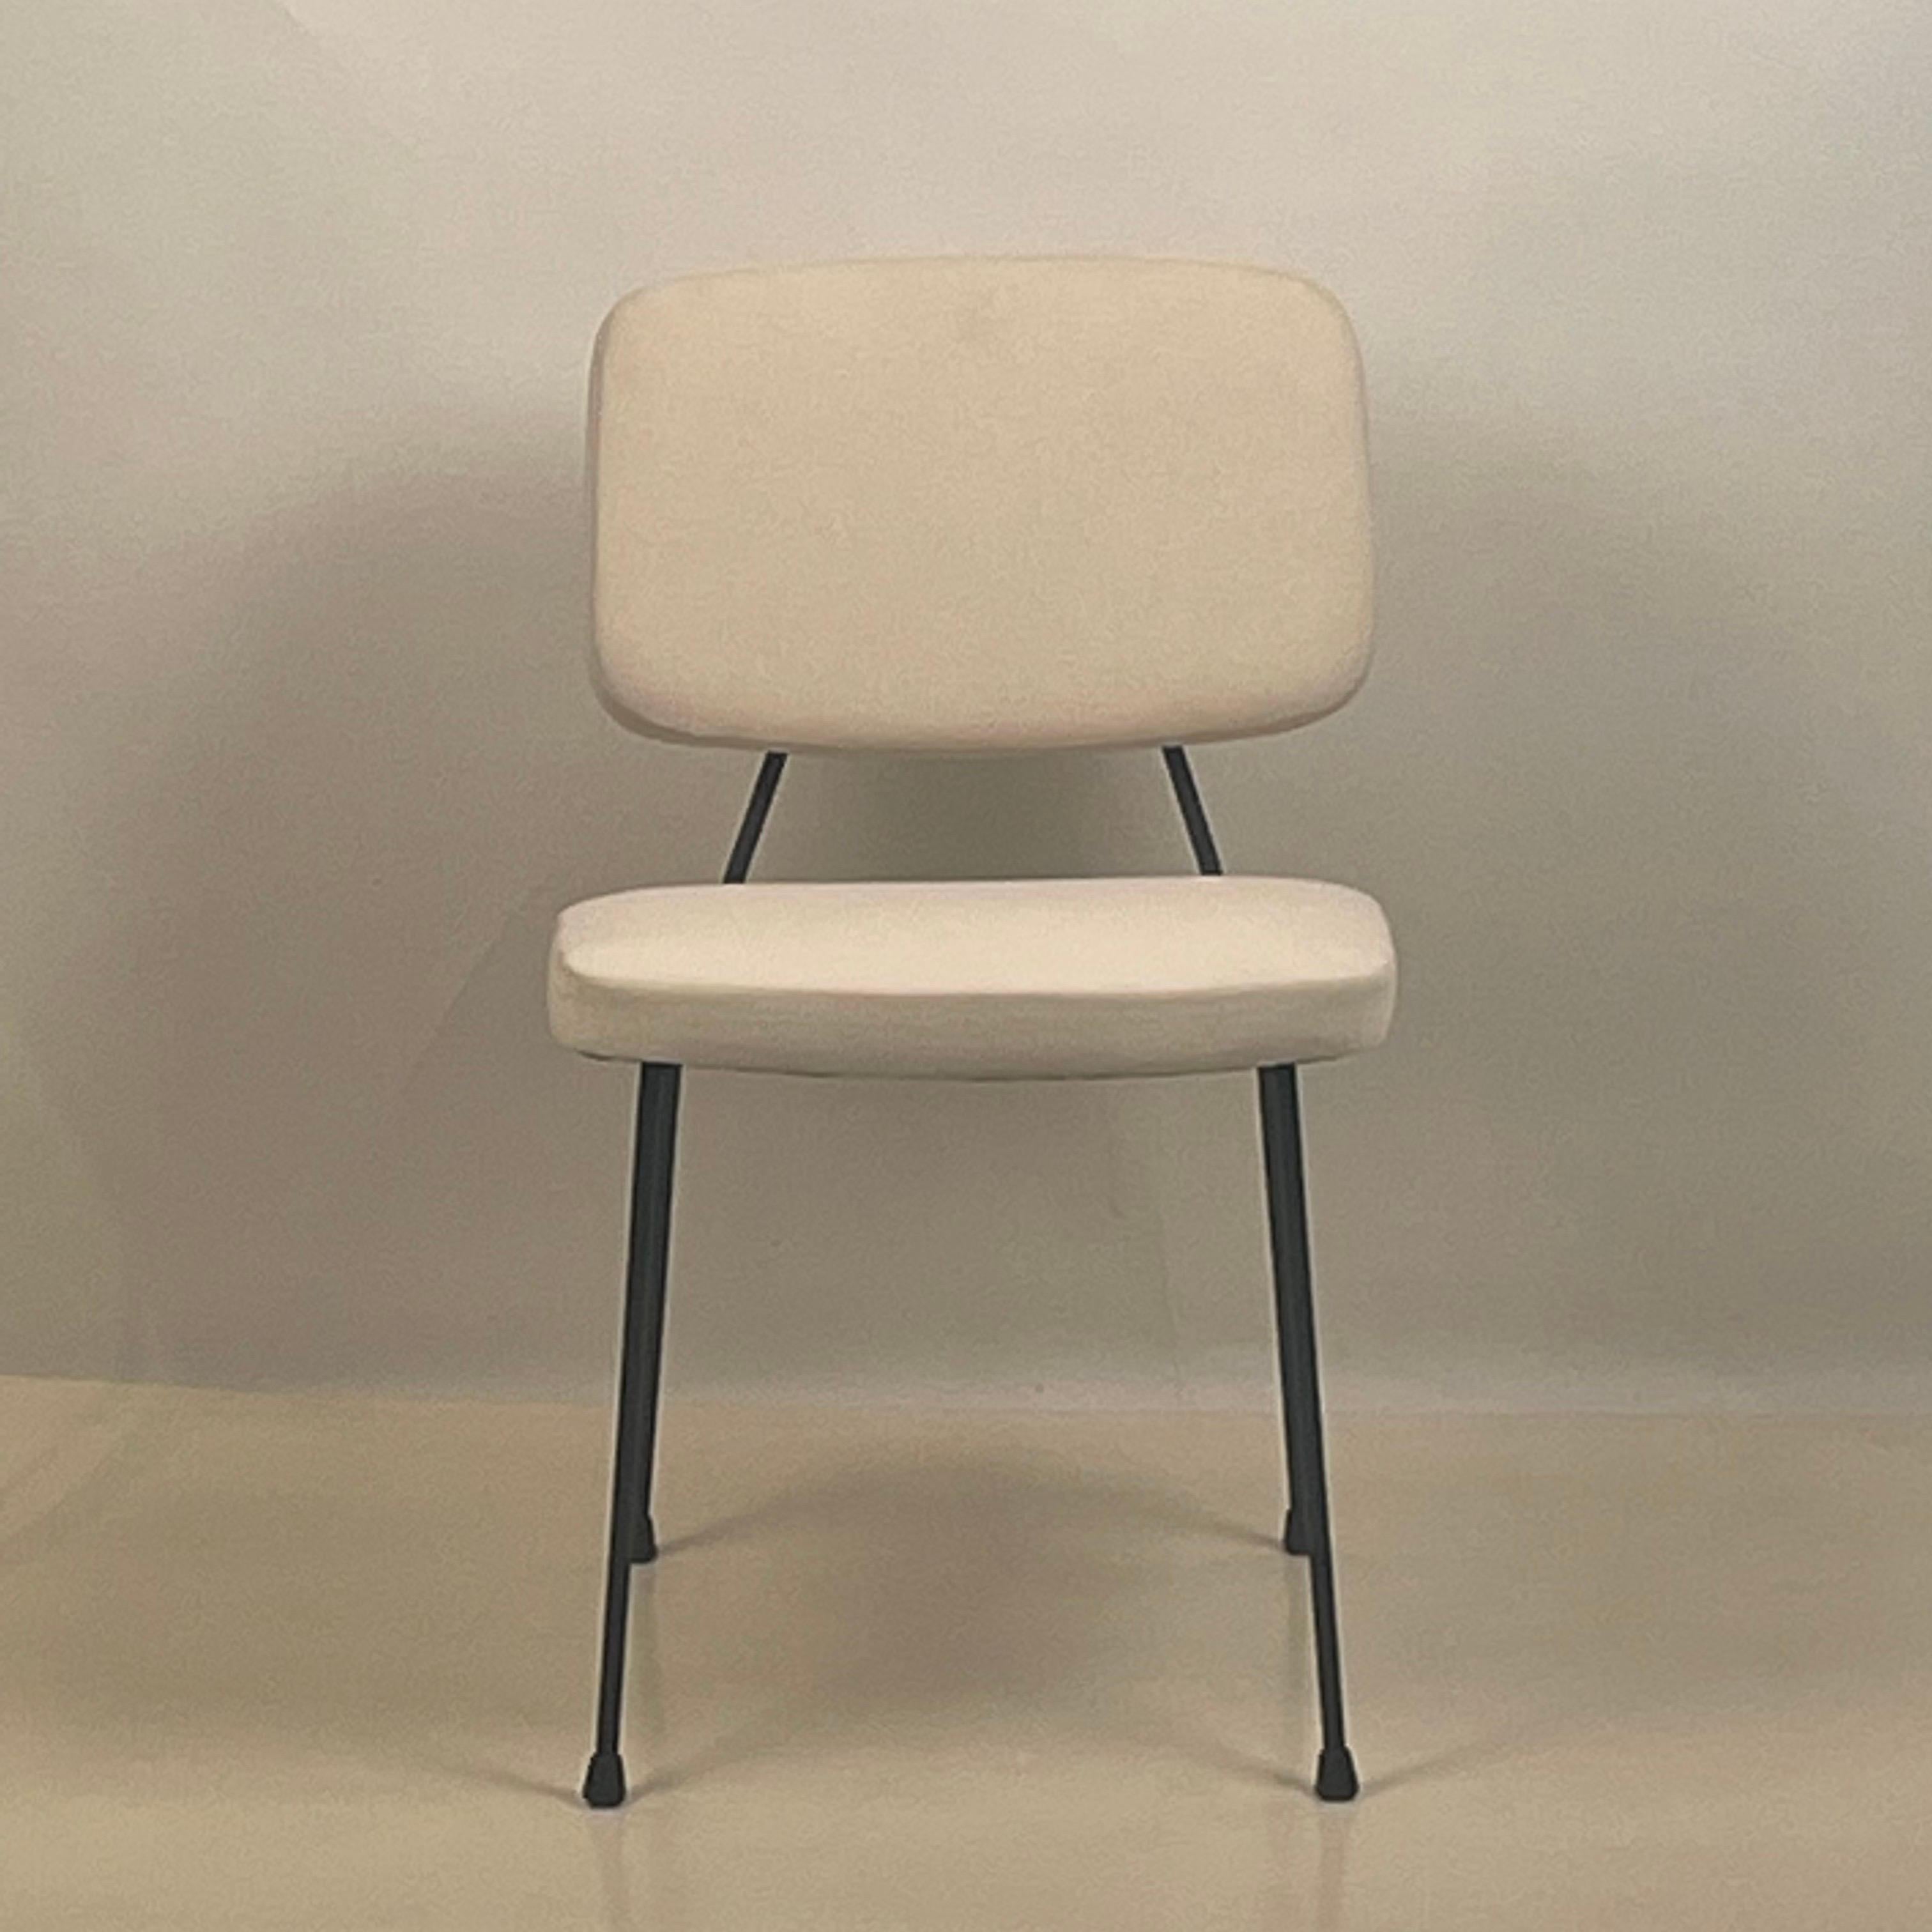 Introducing the 'Décade' chair by Design Frères, the perfect blend of French 60's style and contemporary comfort. Crafted with meticulous attention to detail, this chair features a hand-welded steel frame, ensuring both durability and slender